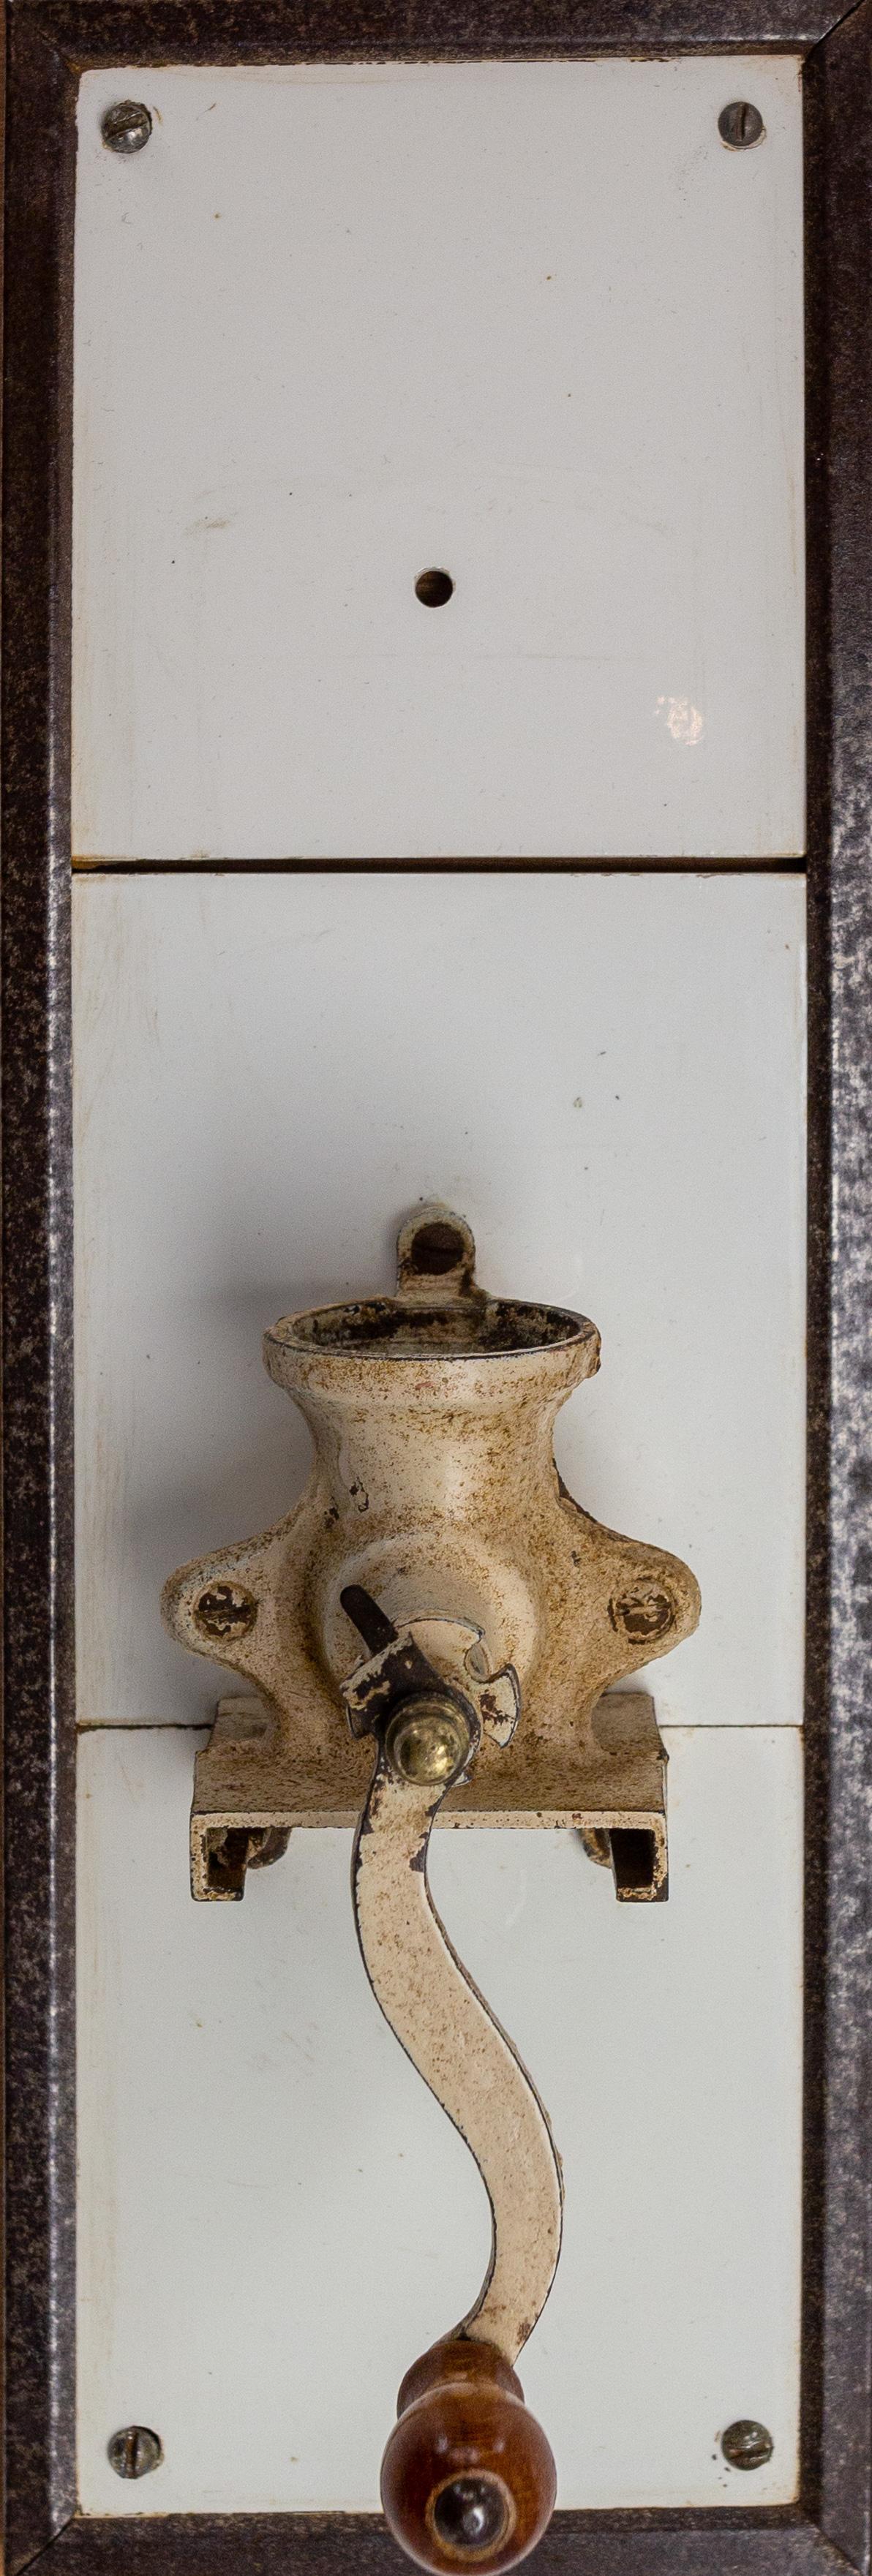 French Country Coffee Grinder, Ceramic, Glass, Iron and Wood, circa 1900 2